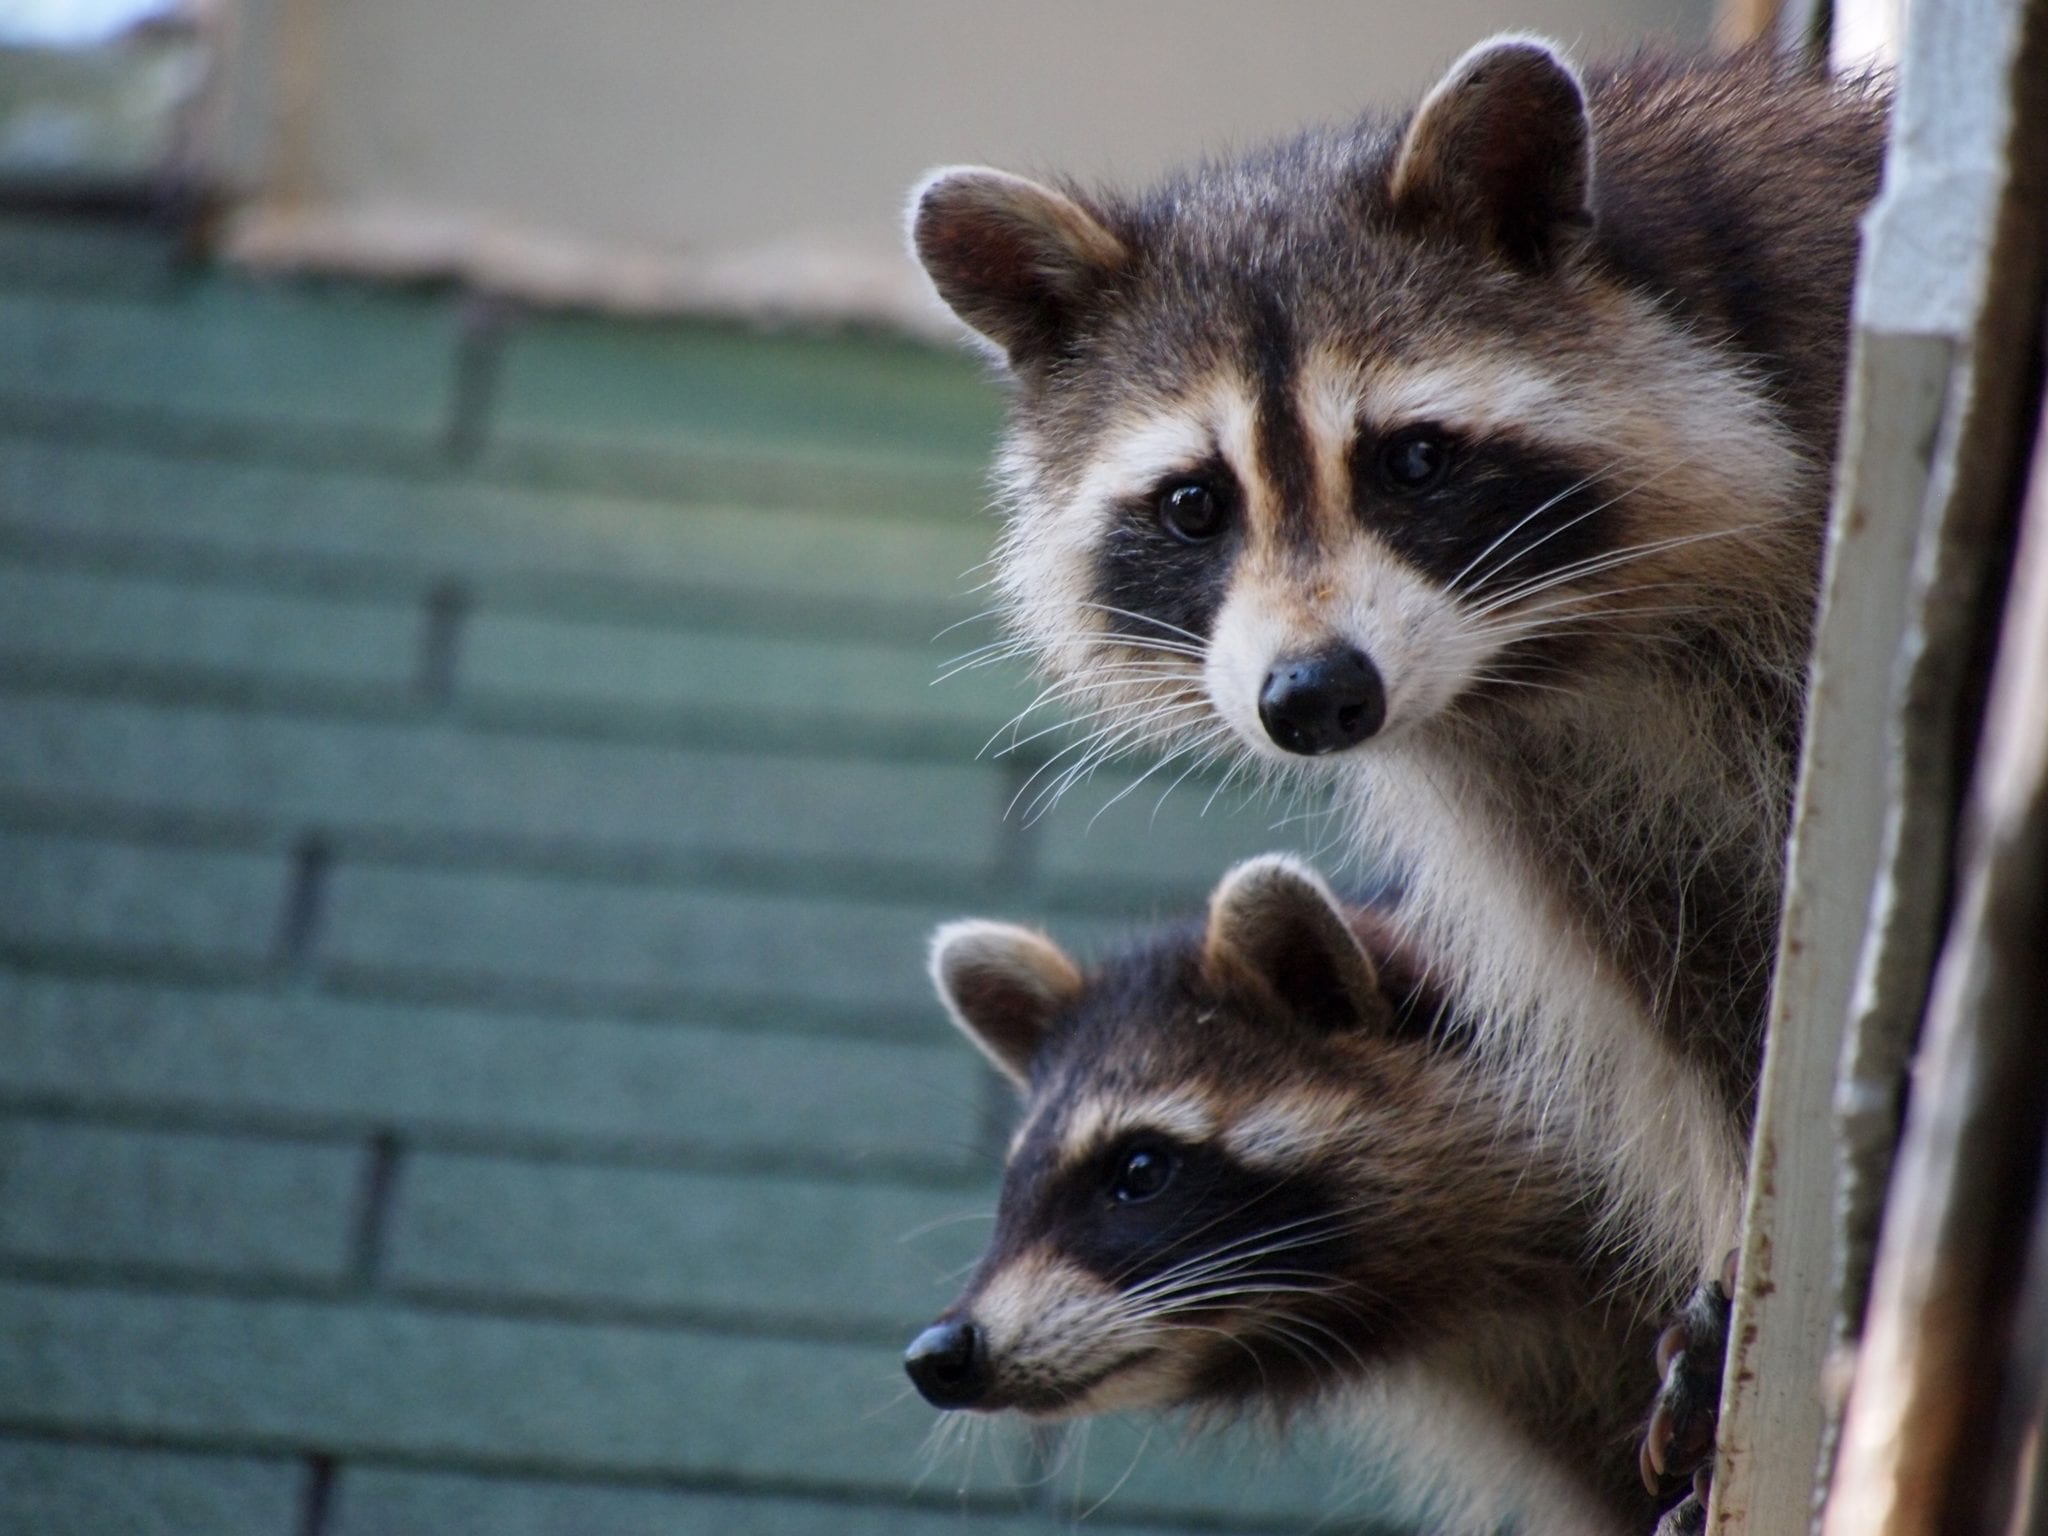 How to Safely Remove a Raccoon from Your Home